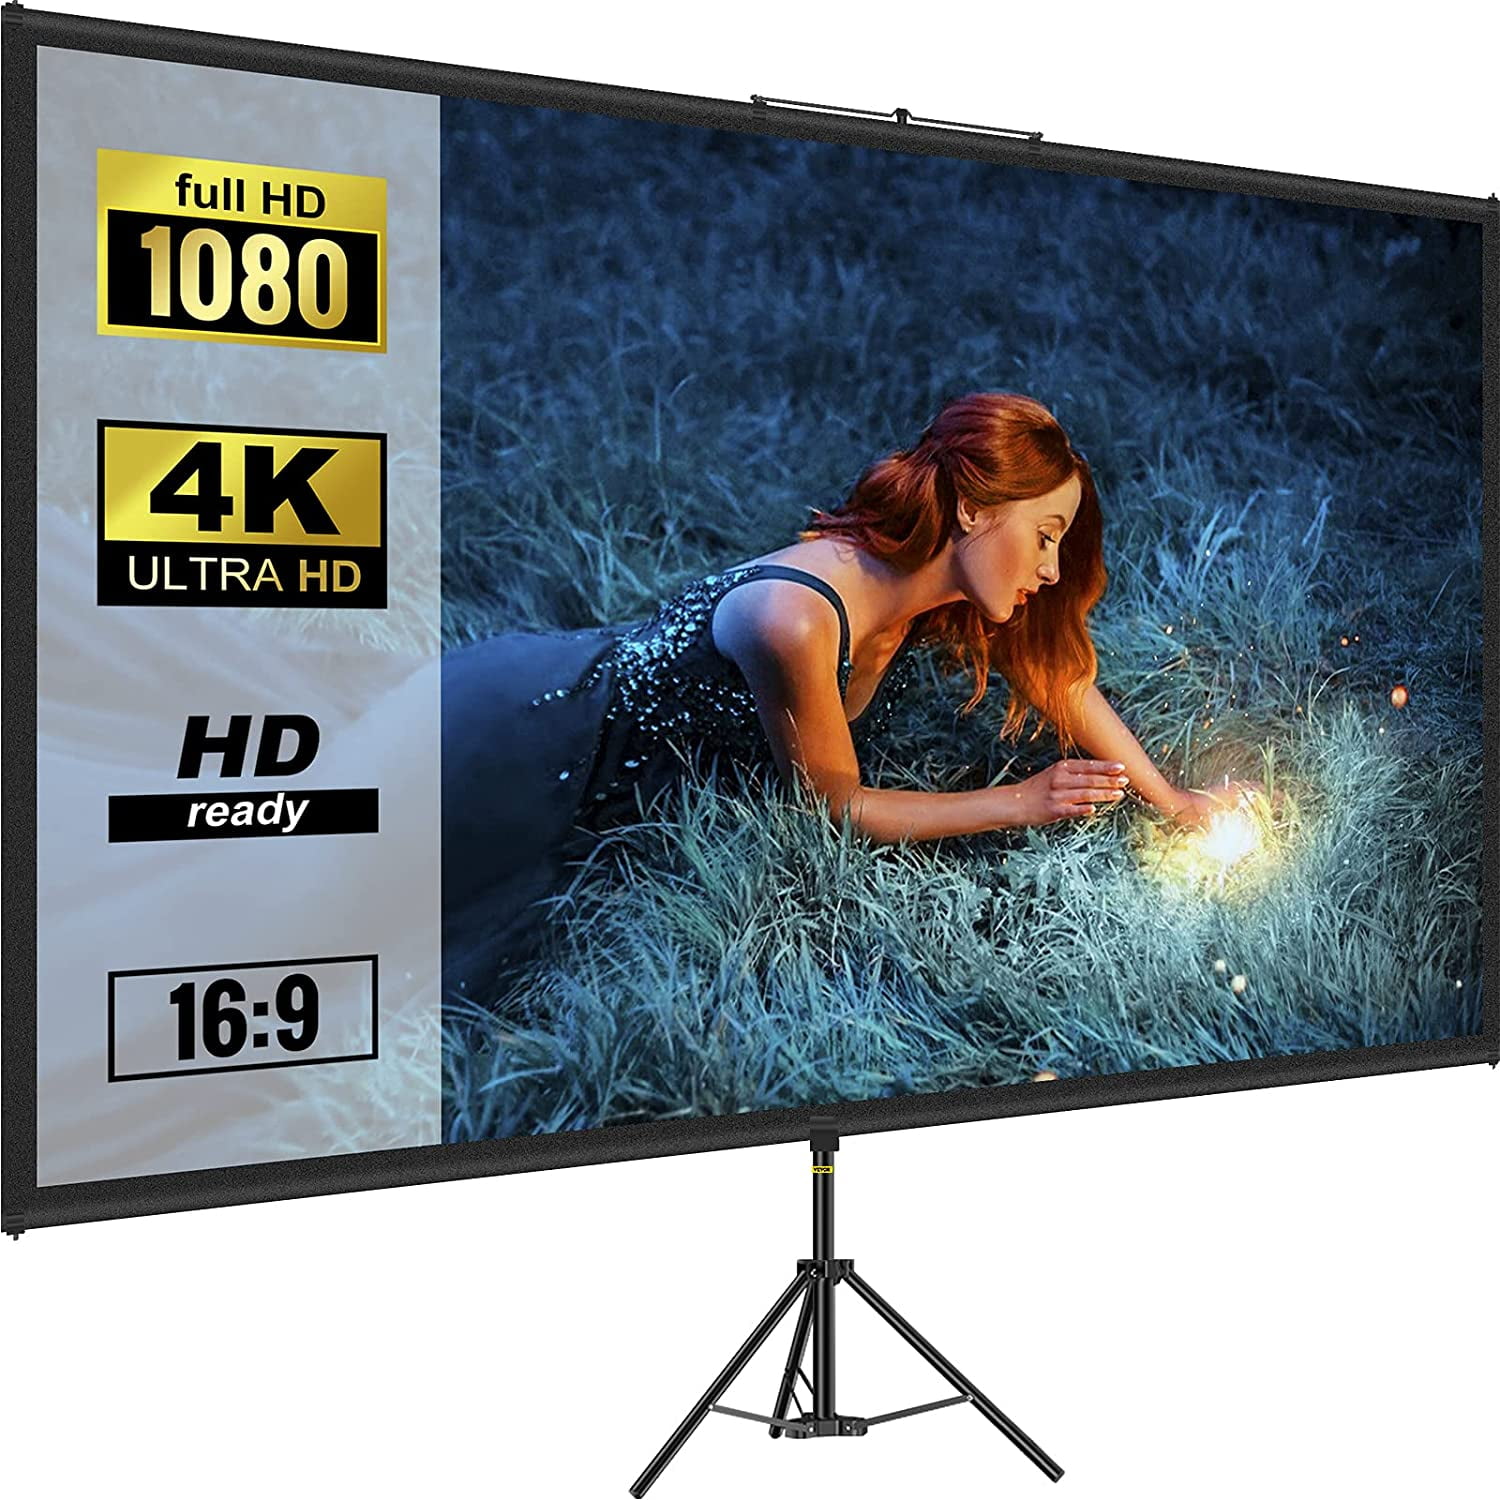 100 Inch-B Keenstone Projector Screen with Stand Indoor Outdoor PVC Projection Screen 4K HD 100'' 16: 9 Wrinkle-Free Design Easy to Clean, 1.1Gain, 160° Viewing Angle & Includes a Carry Bag 